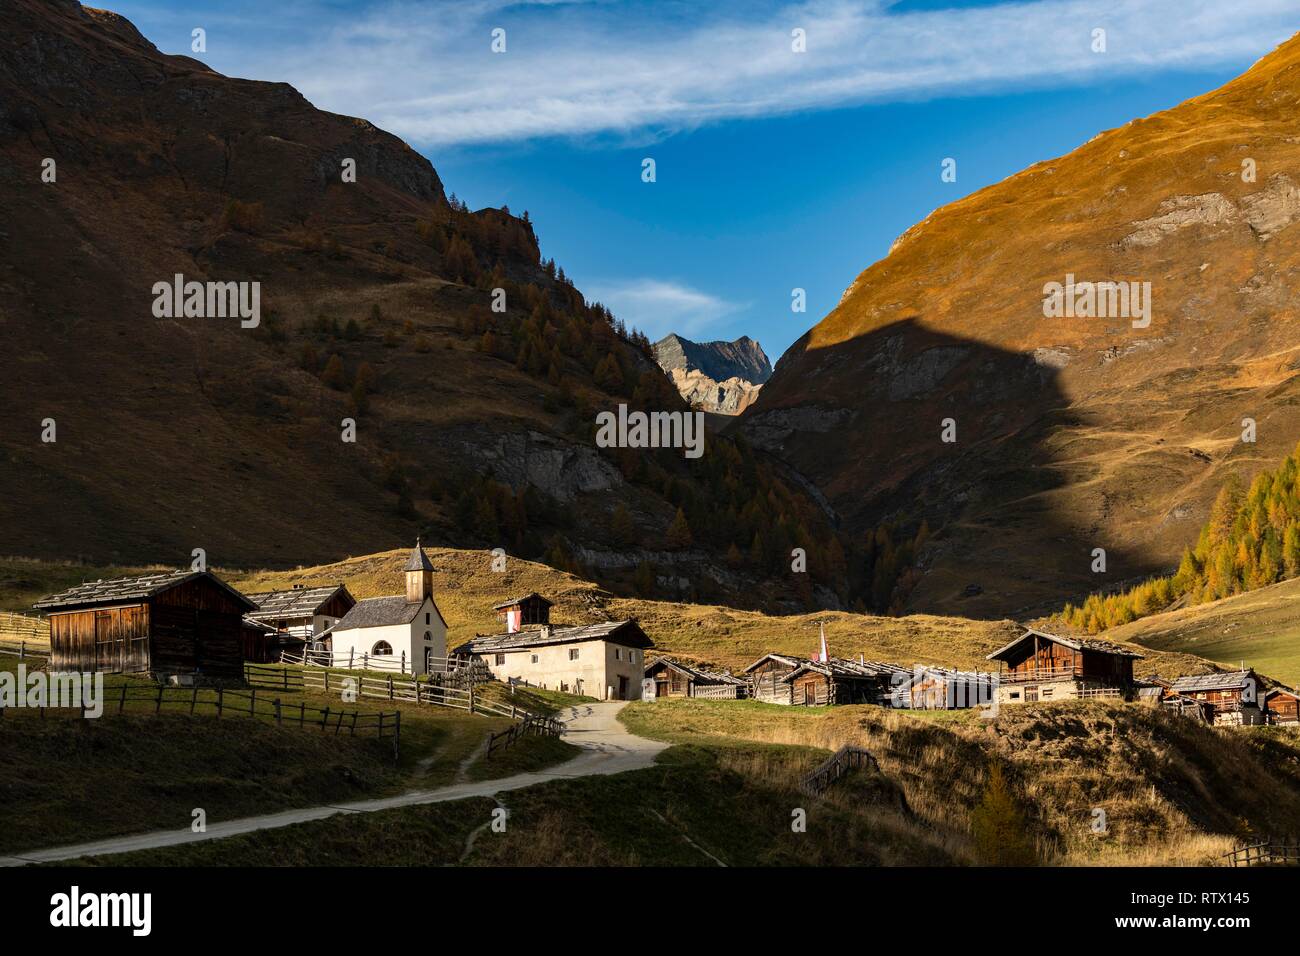 Small mountain village in mountain landscape, Valser Alm, Vals, Valstal, South Tyrol, Italy Stock Photo